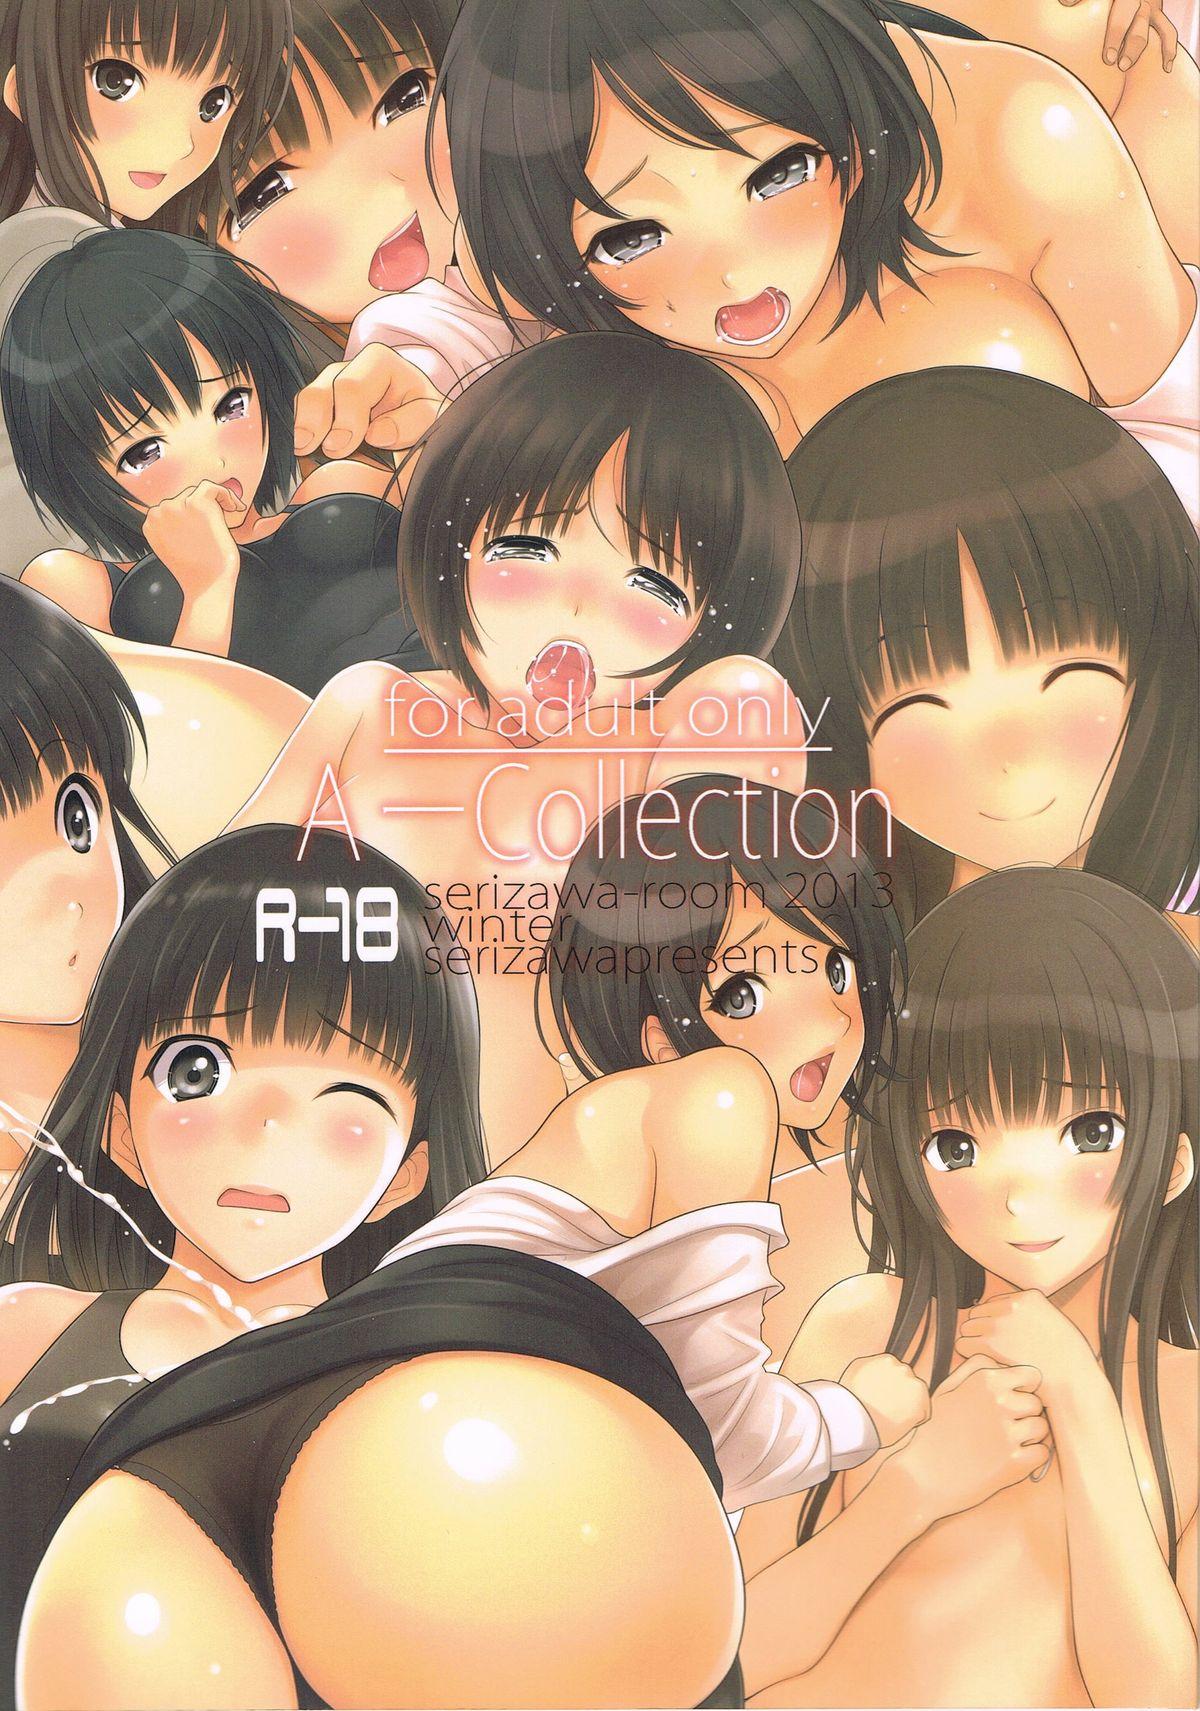 Blowjobs A-Collection - Amagami Bj - Picture 1